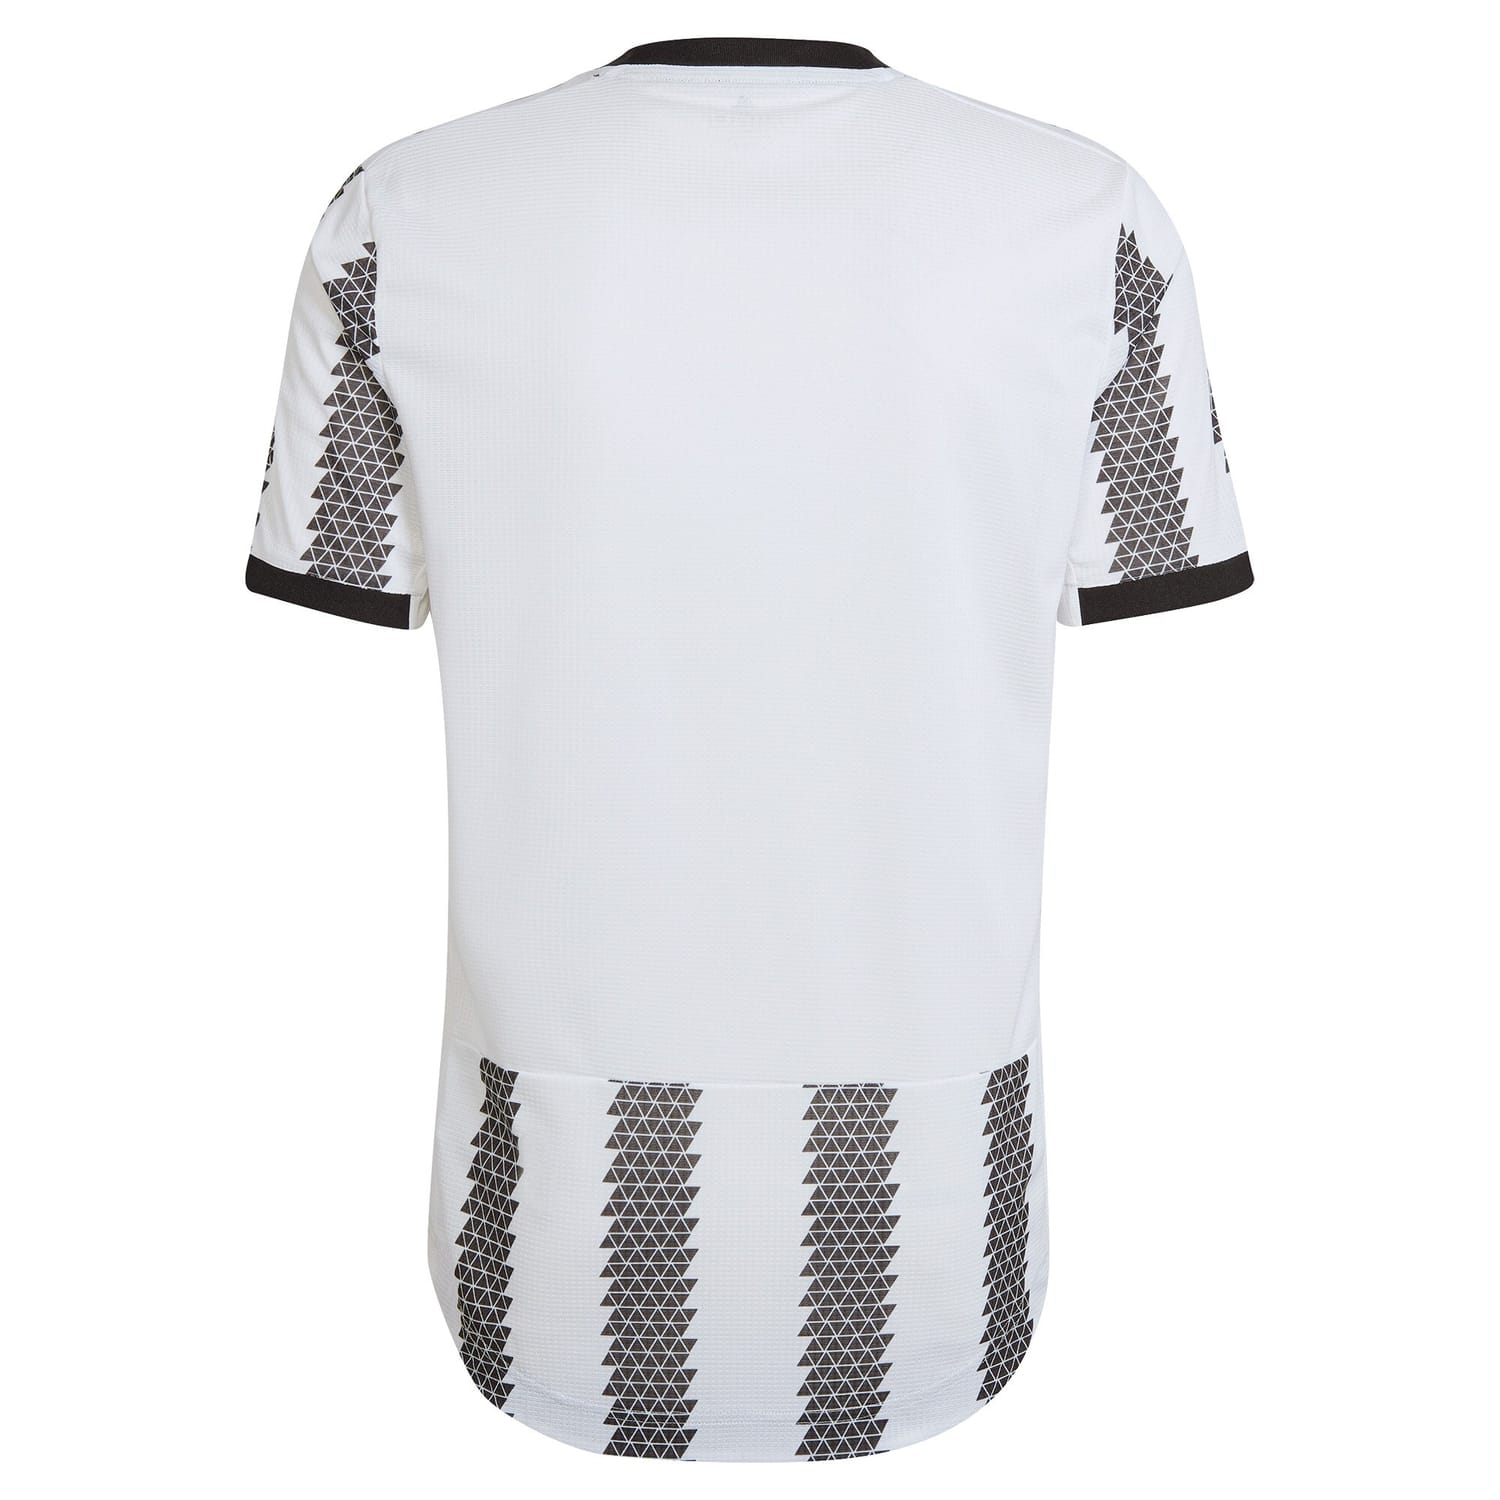 Serie A Juventus Home Authentic Jersey Shirt White 2022-23 for Men